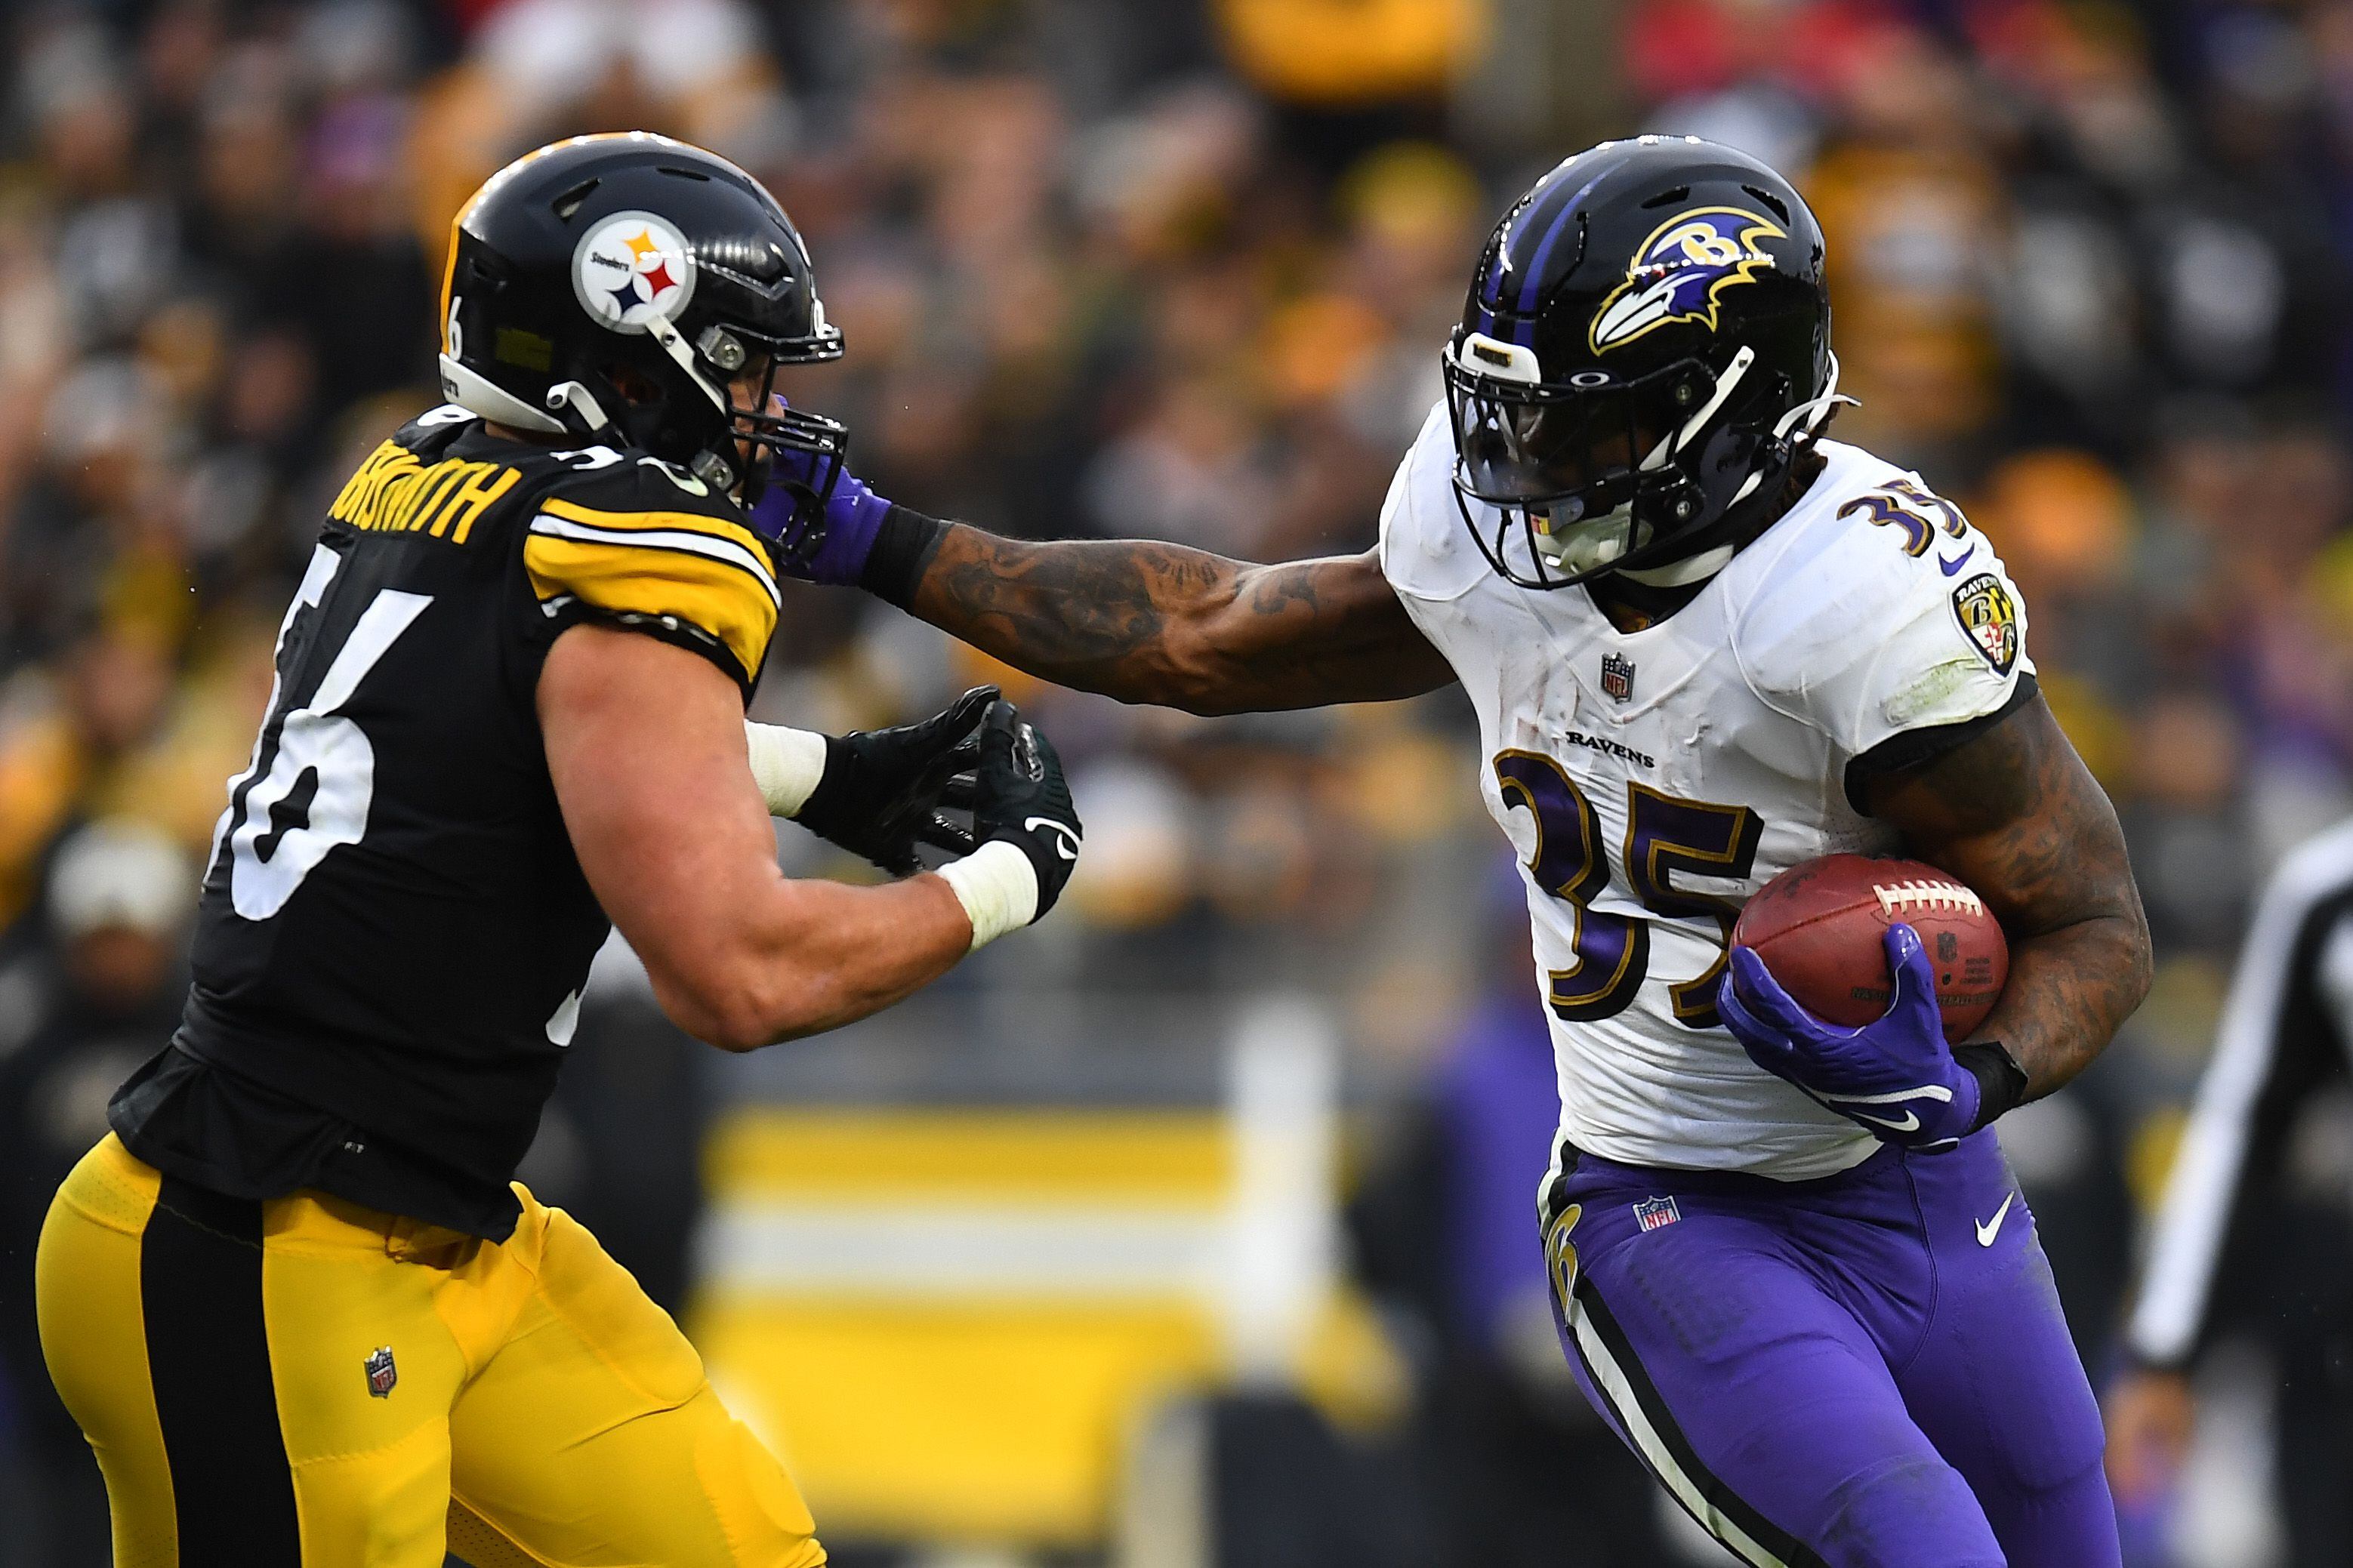 Tyler Huntley Throws TD Pass, Gives Ravens Lead Over Steelers